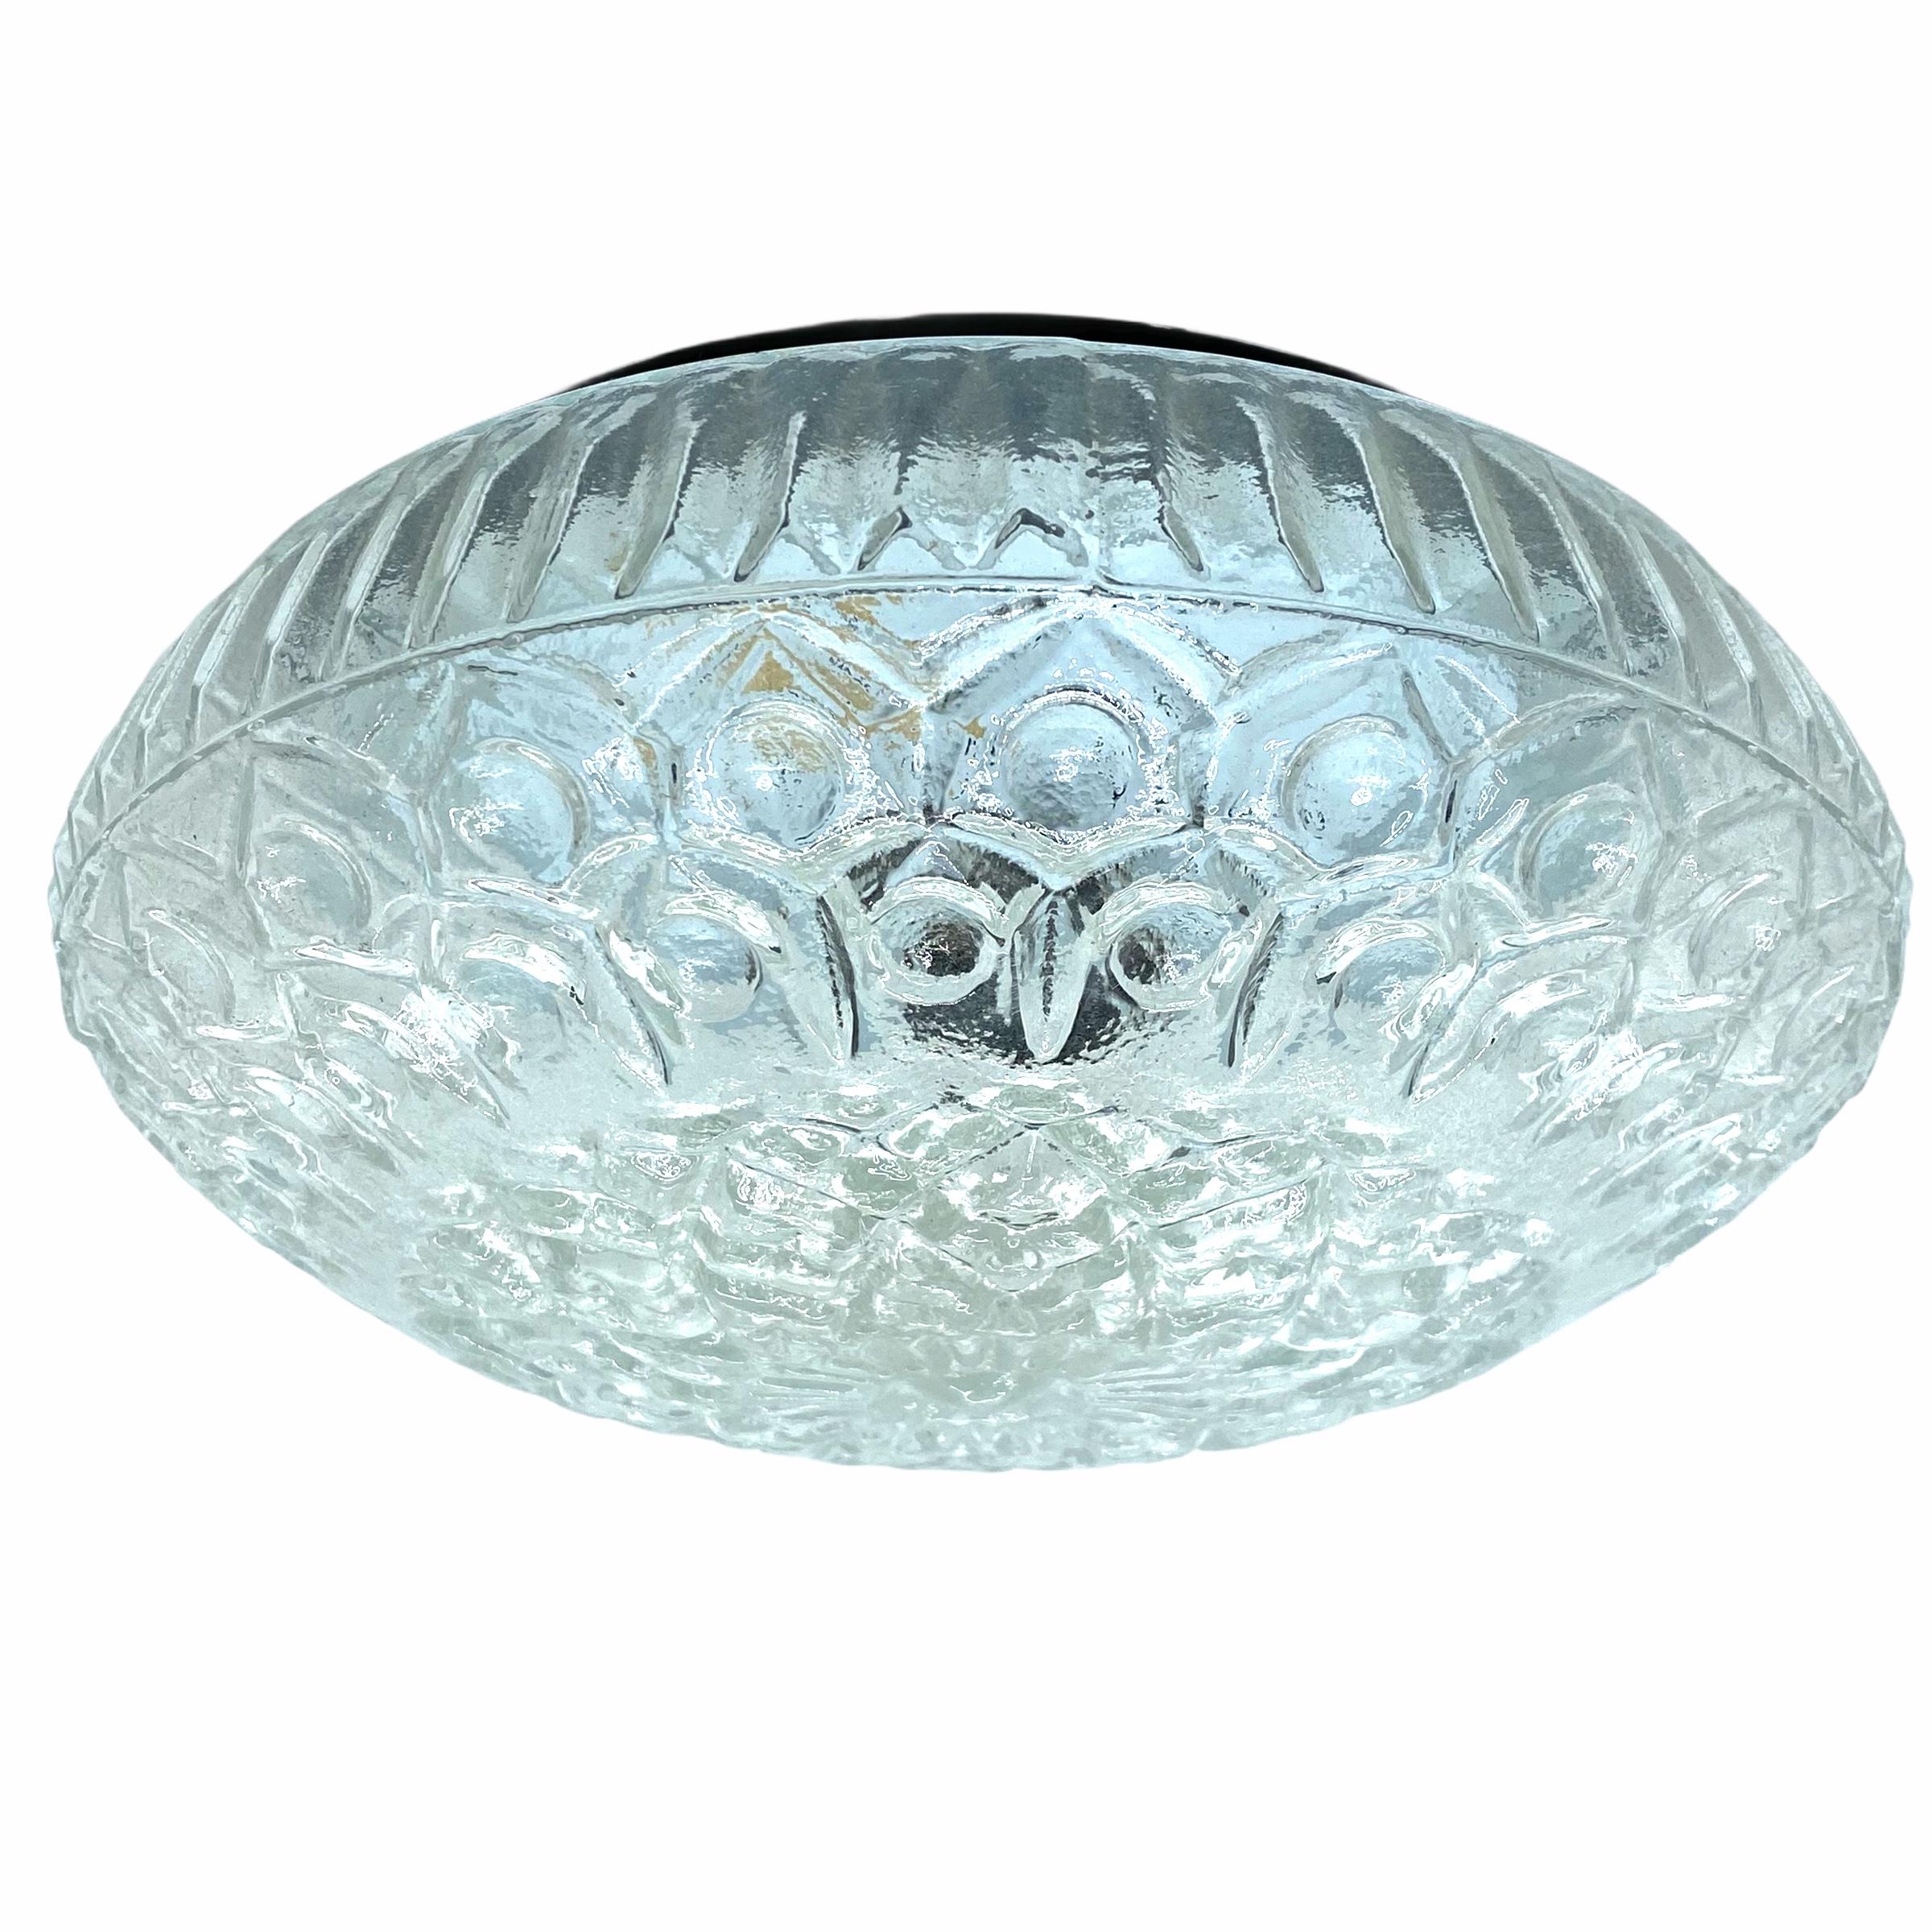 A beautiful flush mount by Massive Leuchten, Germany. Gorgeous textured glass flush mount with metal fixture. The fixture requires one European E27 Edison or medium bulb up to 60 watts.